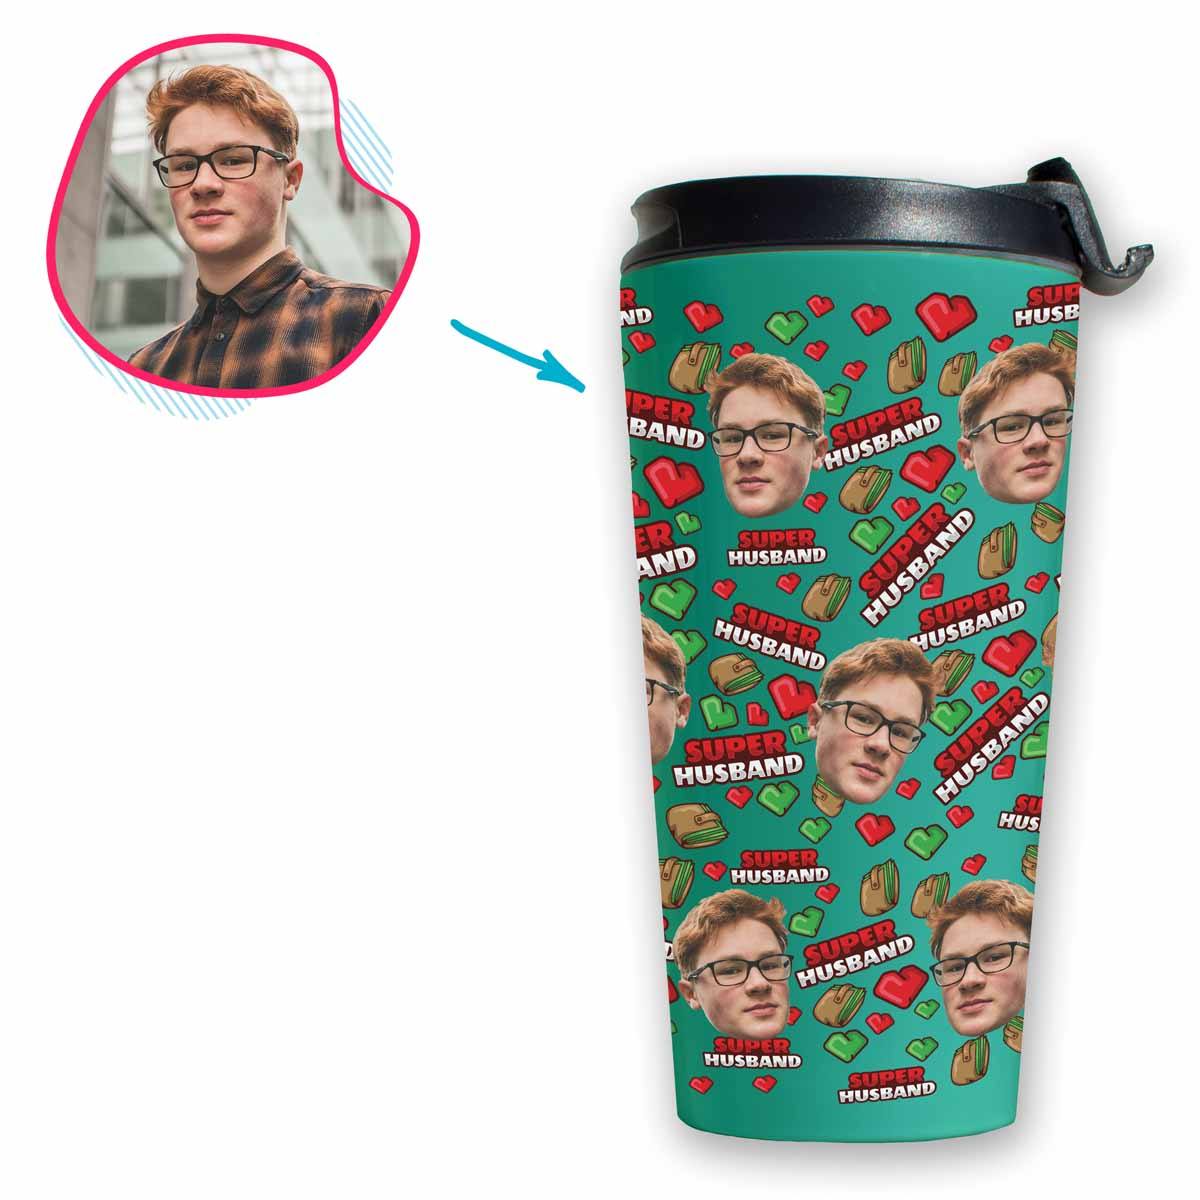 Mint Husband personalized travel mug with photo of face printed on it